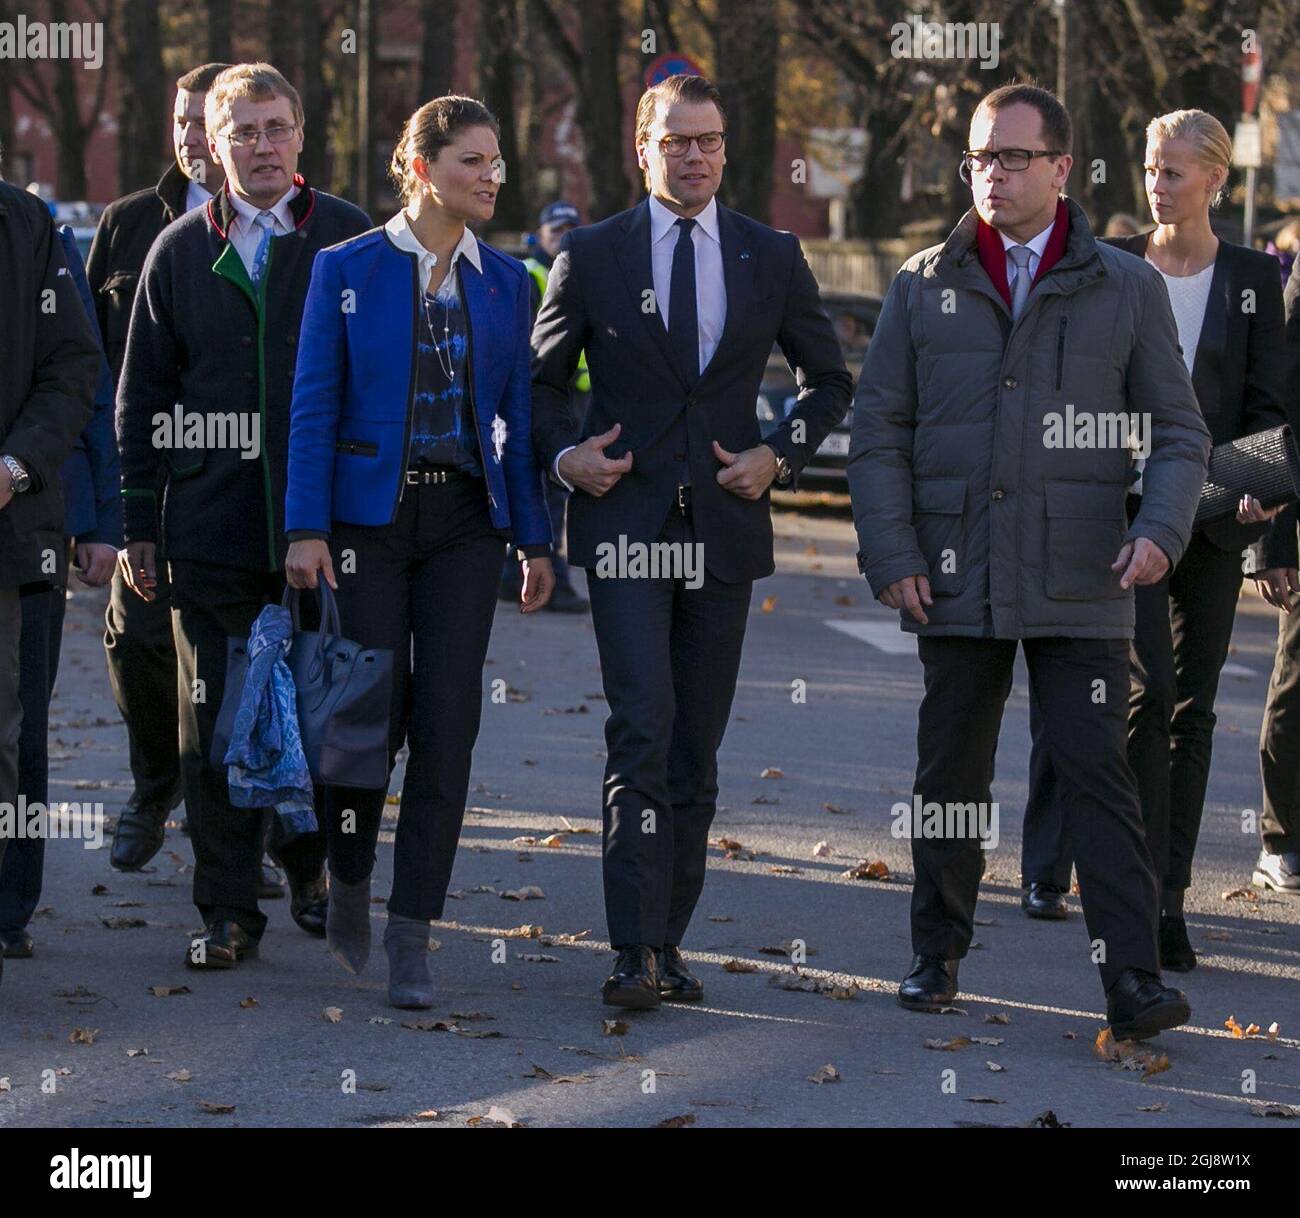 Tartu 2014-10-29 Crown Princess Victoria and Prince Daniel arrive at the Estonian National Museum in Tartu together with the museum's director TÂ›nis Lukas and Tartus Mayor Urmas Klaas on the second day of the Crown Princess Couple's official visit to Estonia on October 29 201 Foto Karli Saul/ SCANPIX BALTICS / TT / kod 20985 ref:  Stock Photo